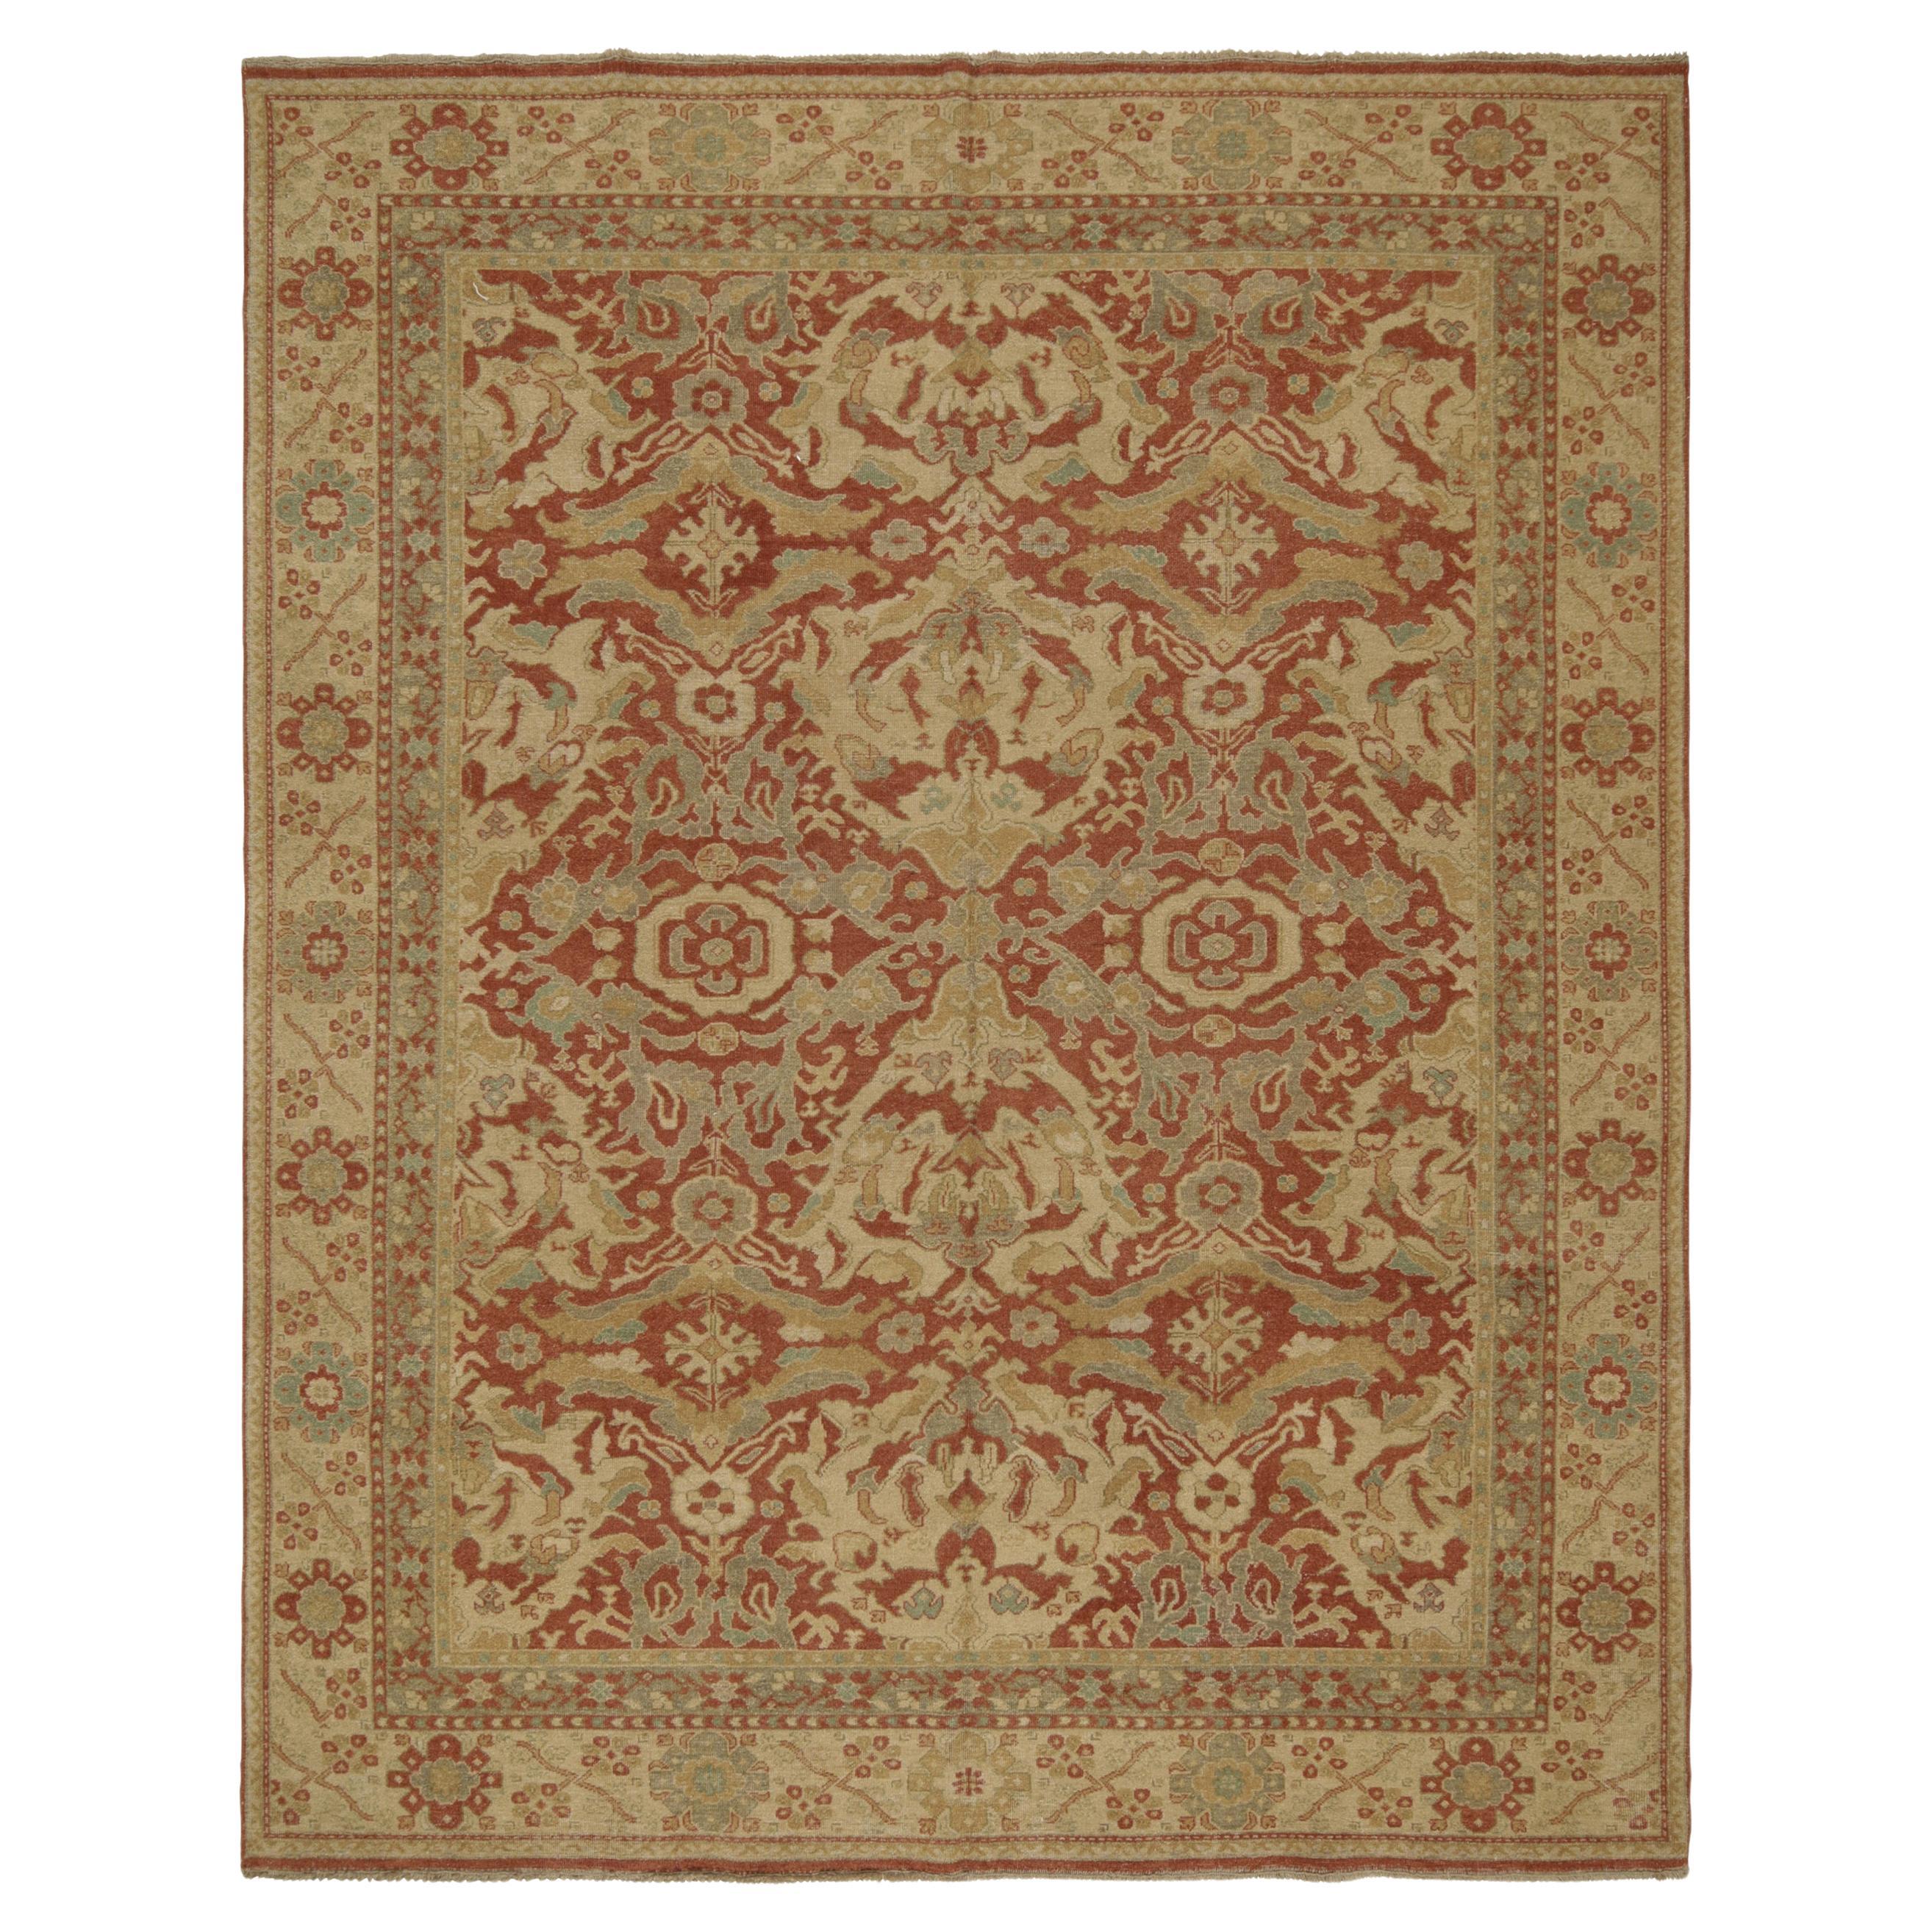 Rug & Kilim’s Oushak style Rug in Red, Beige and Gray-Blue Floral Pattern